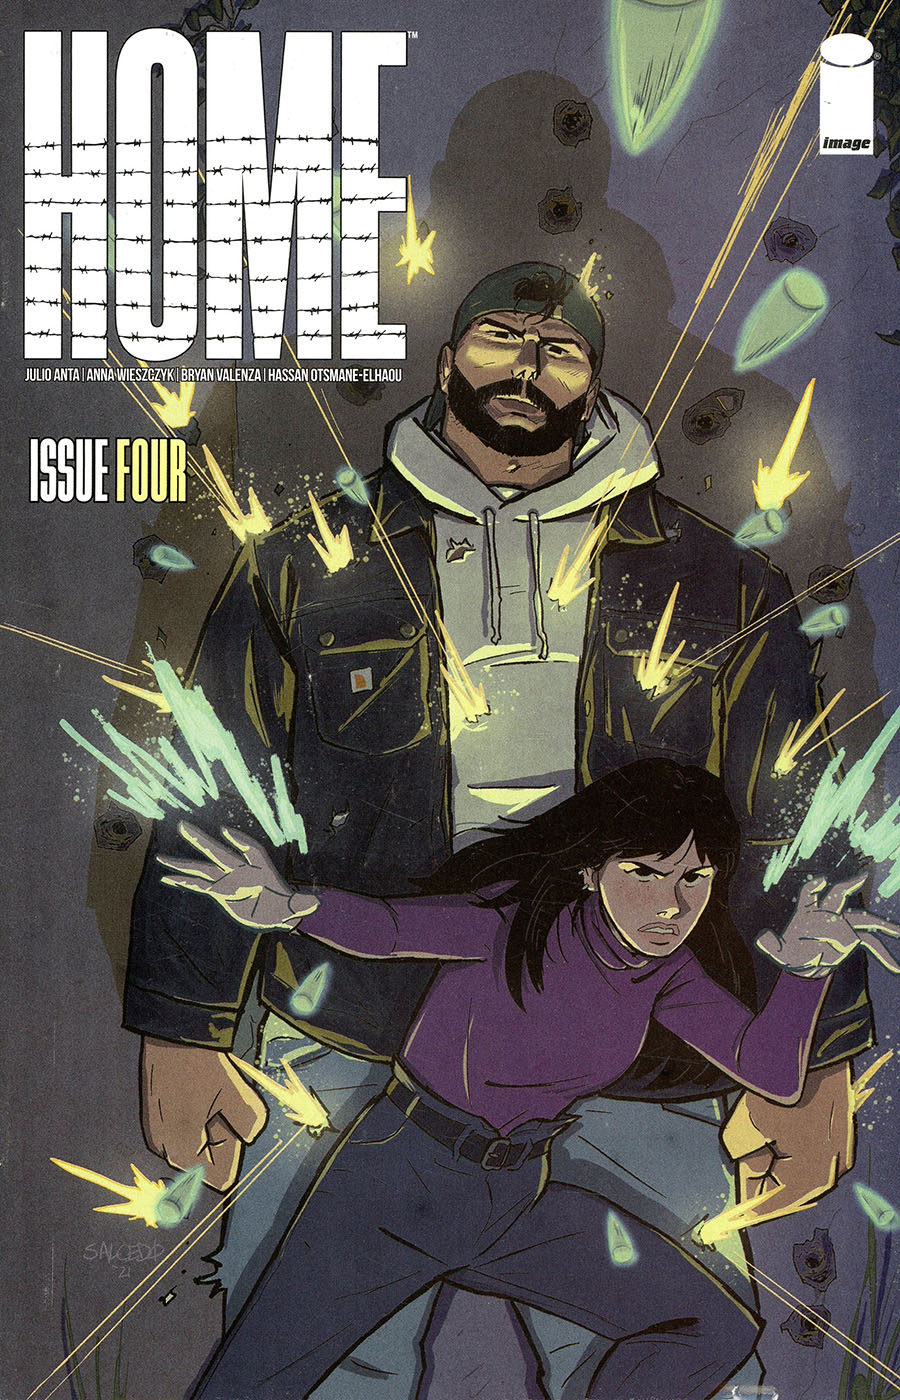 Home (Image Comics) #4 Cover B Variant Jacoby Salcedo Cover